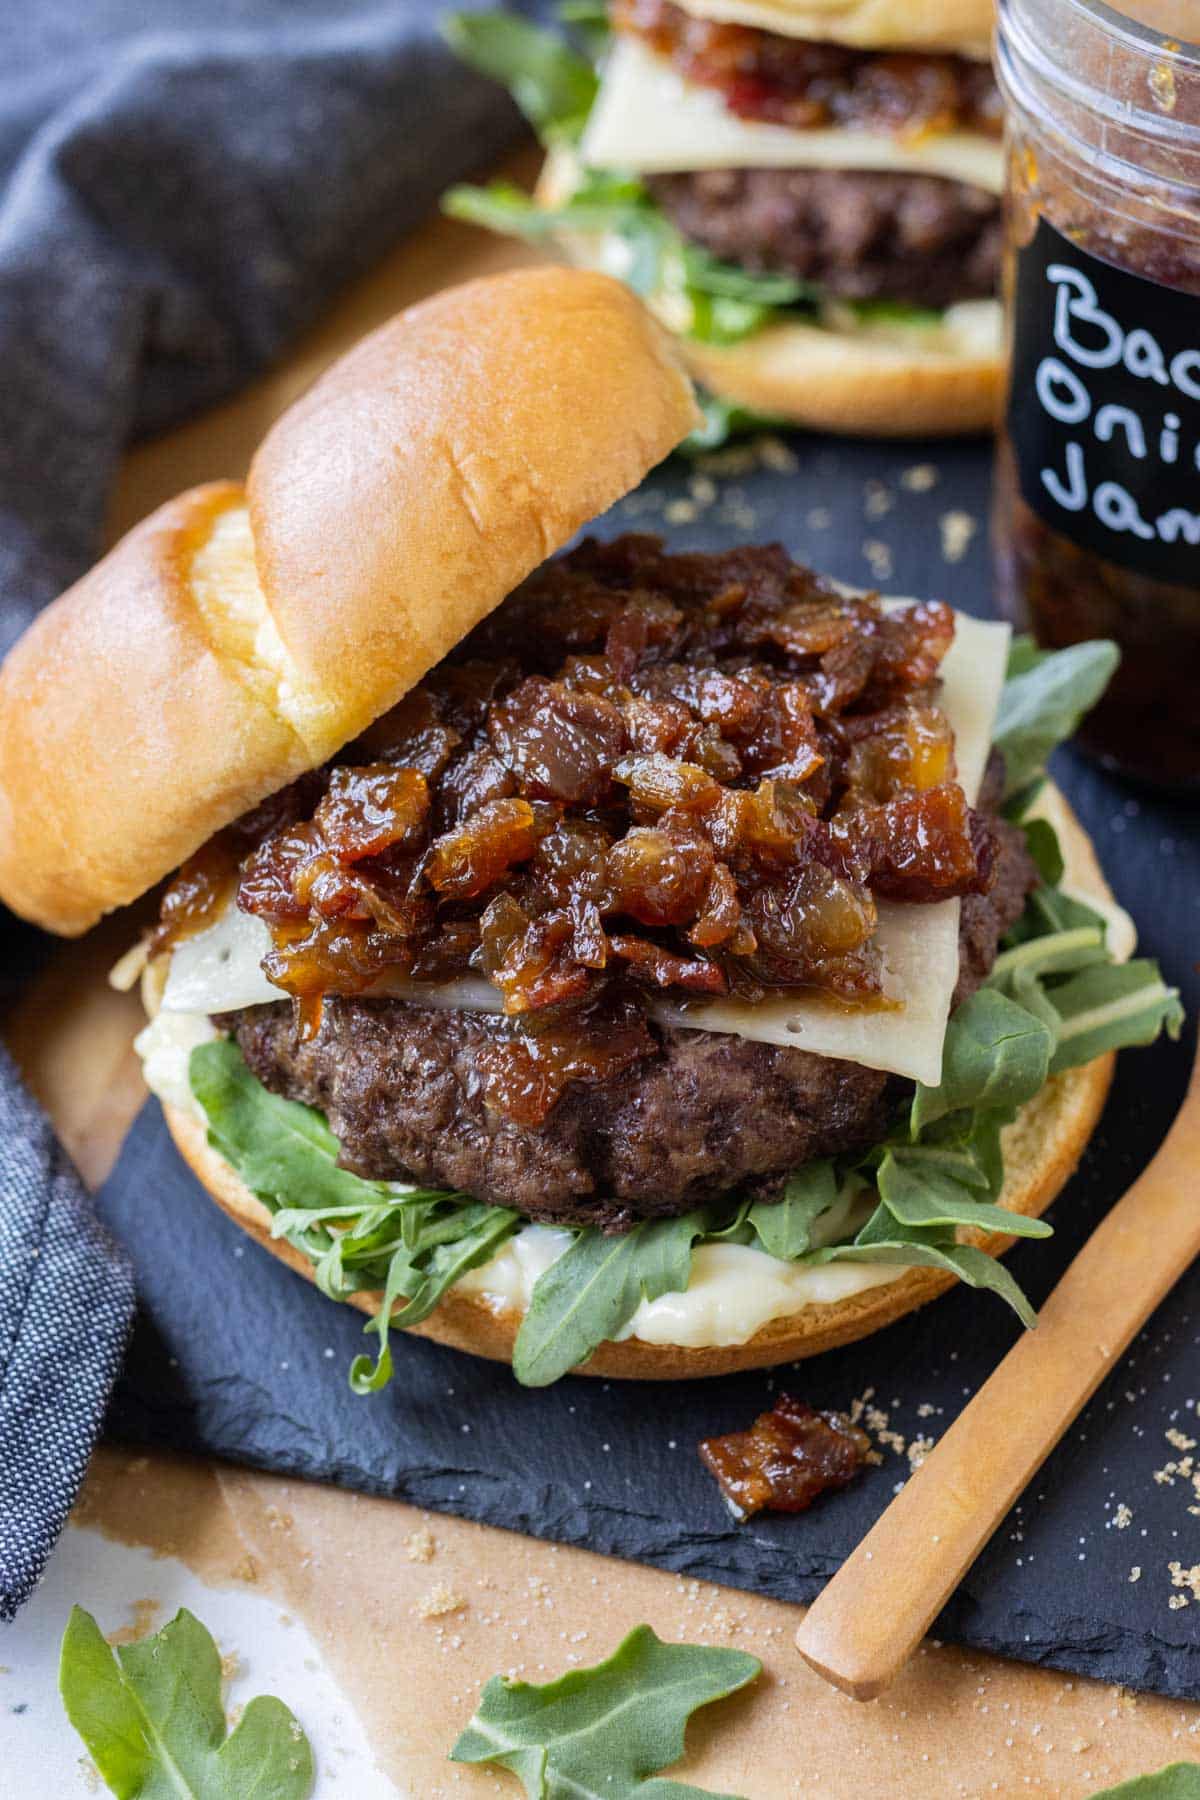 Arugula, swiss cheese, and homemade bacon onion jam is served on a hamburger.